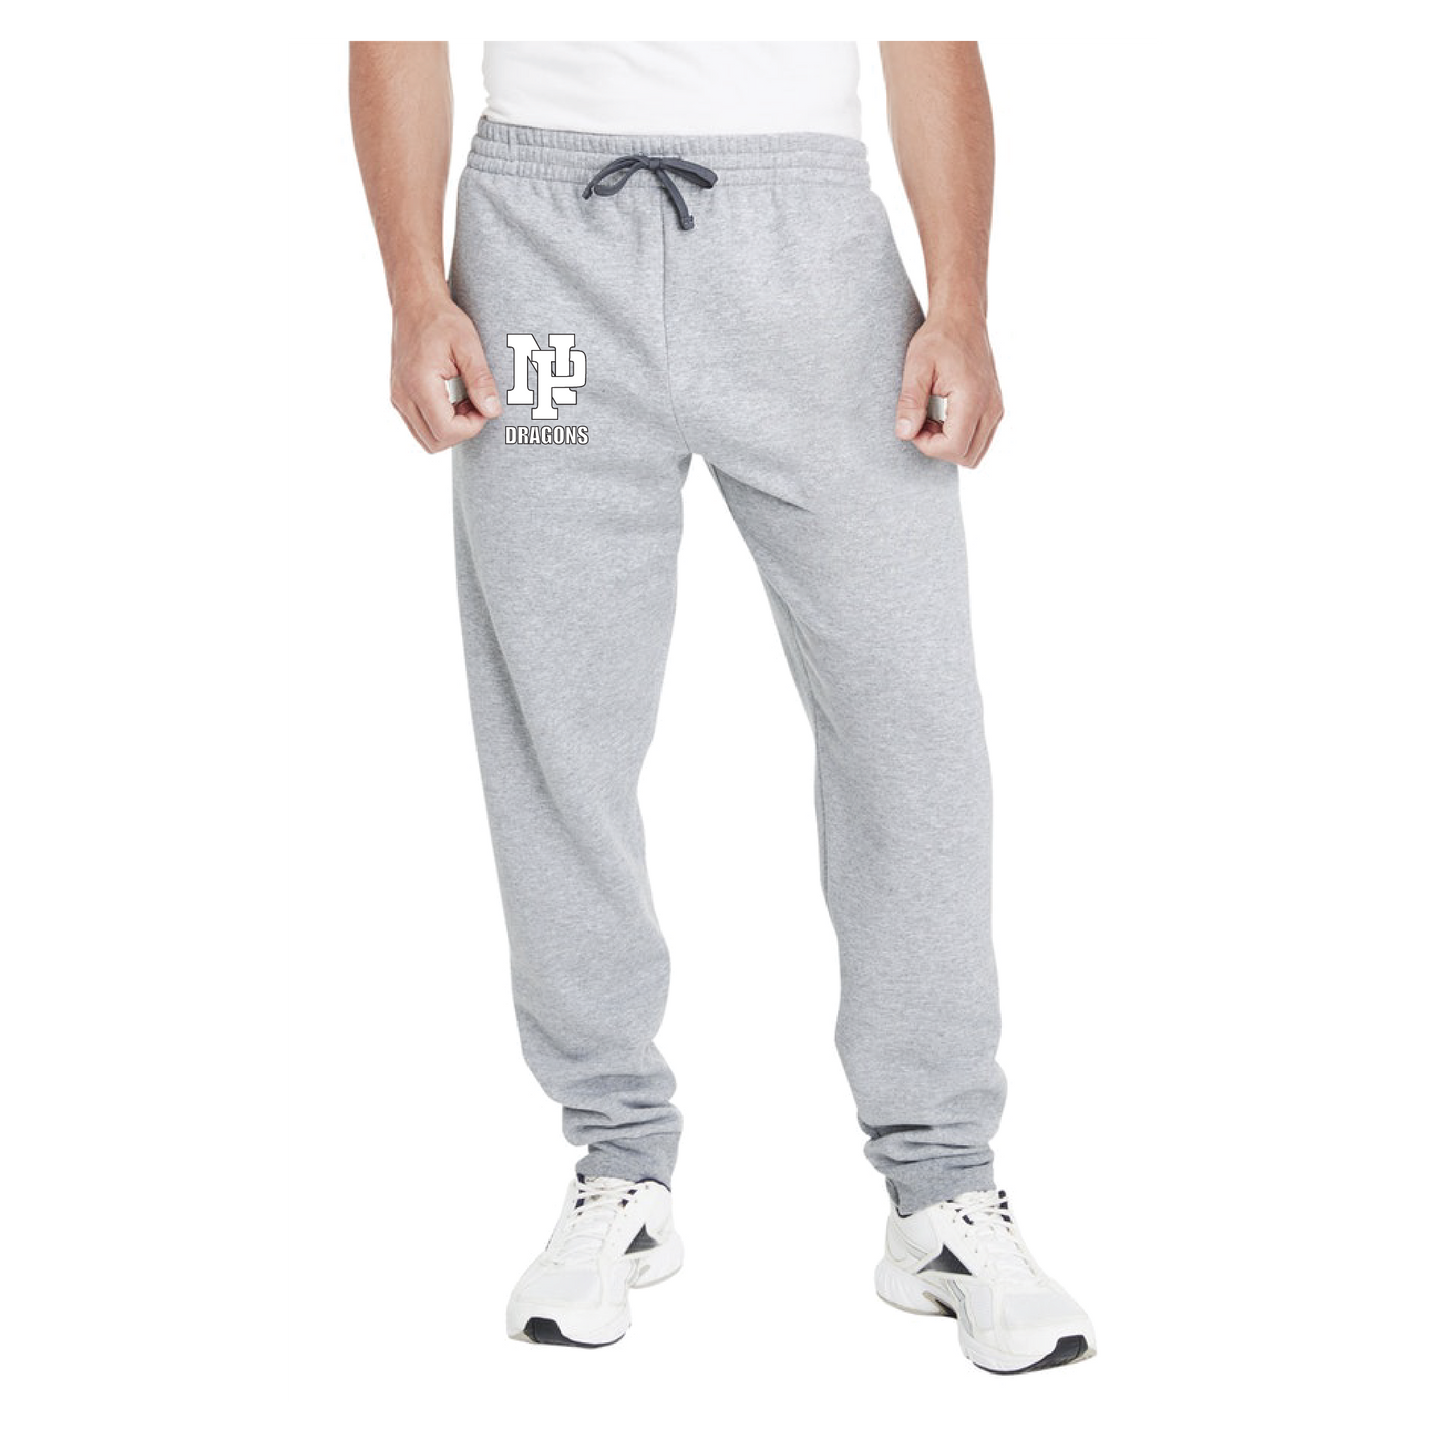 Adult Unisex Joggers - White NP Dragons, Stacked